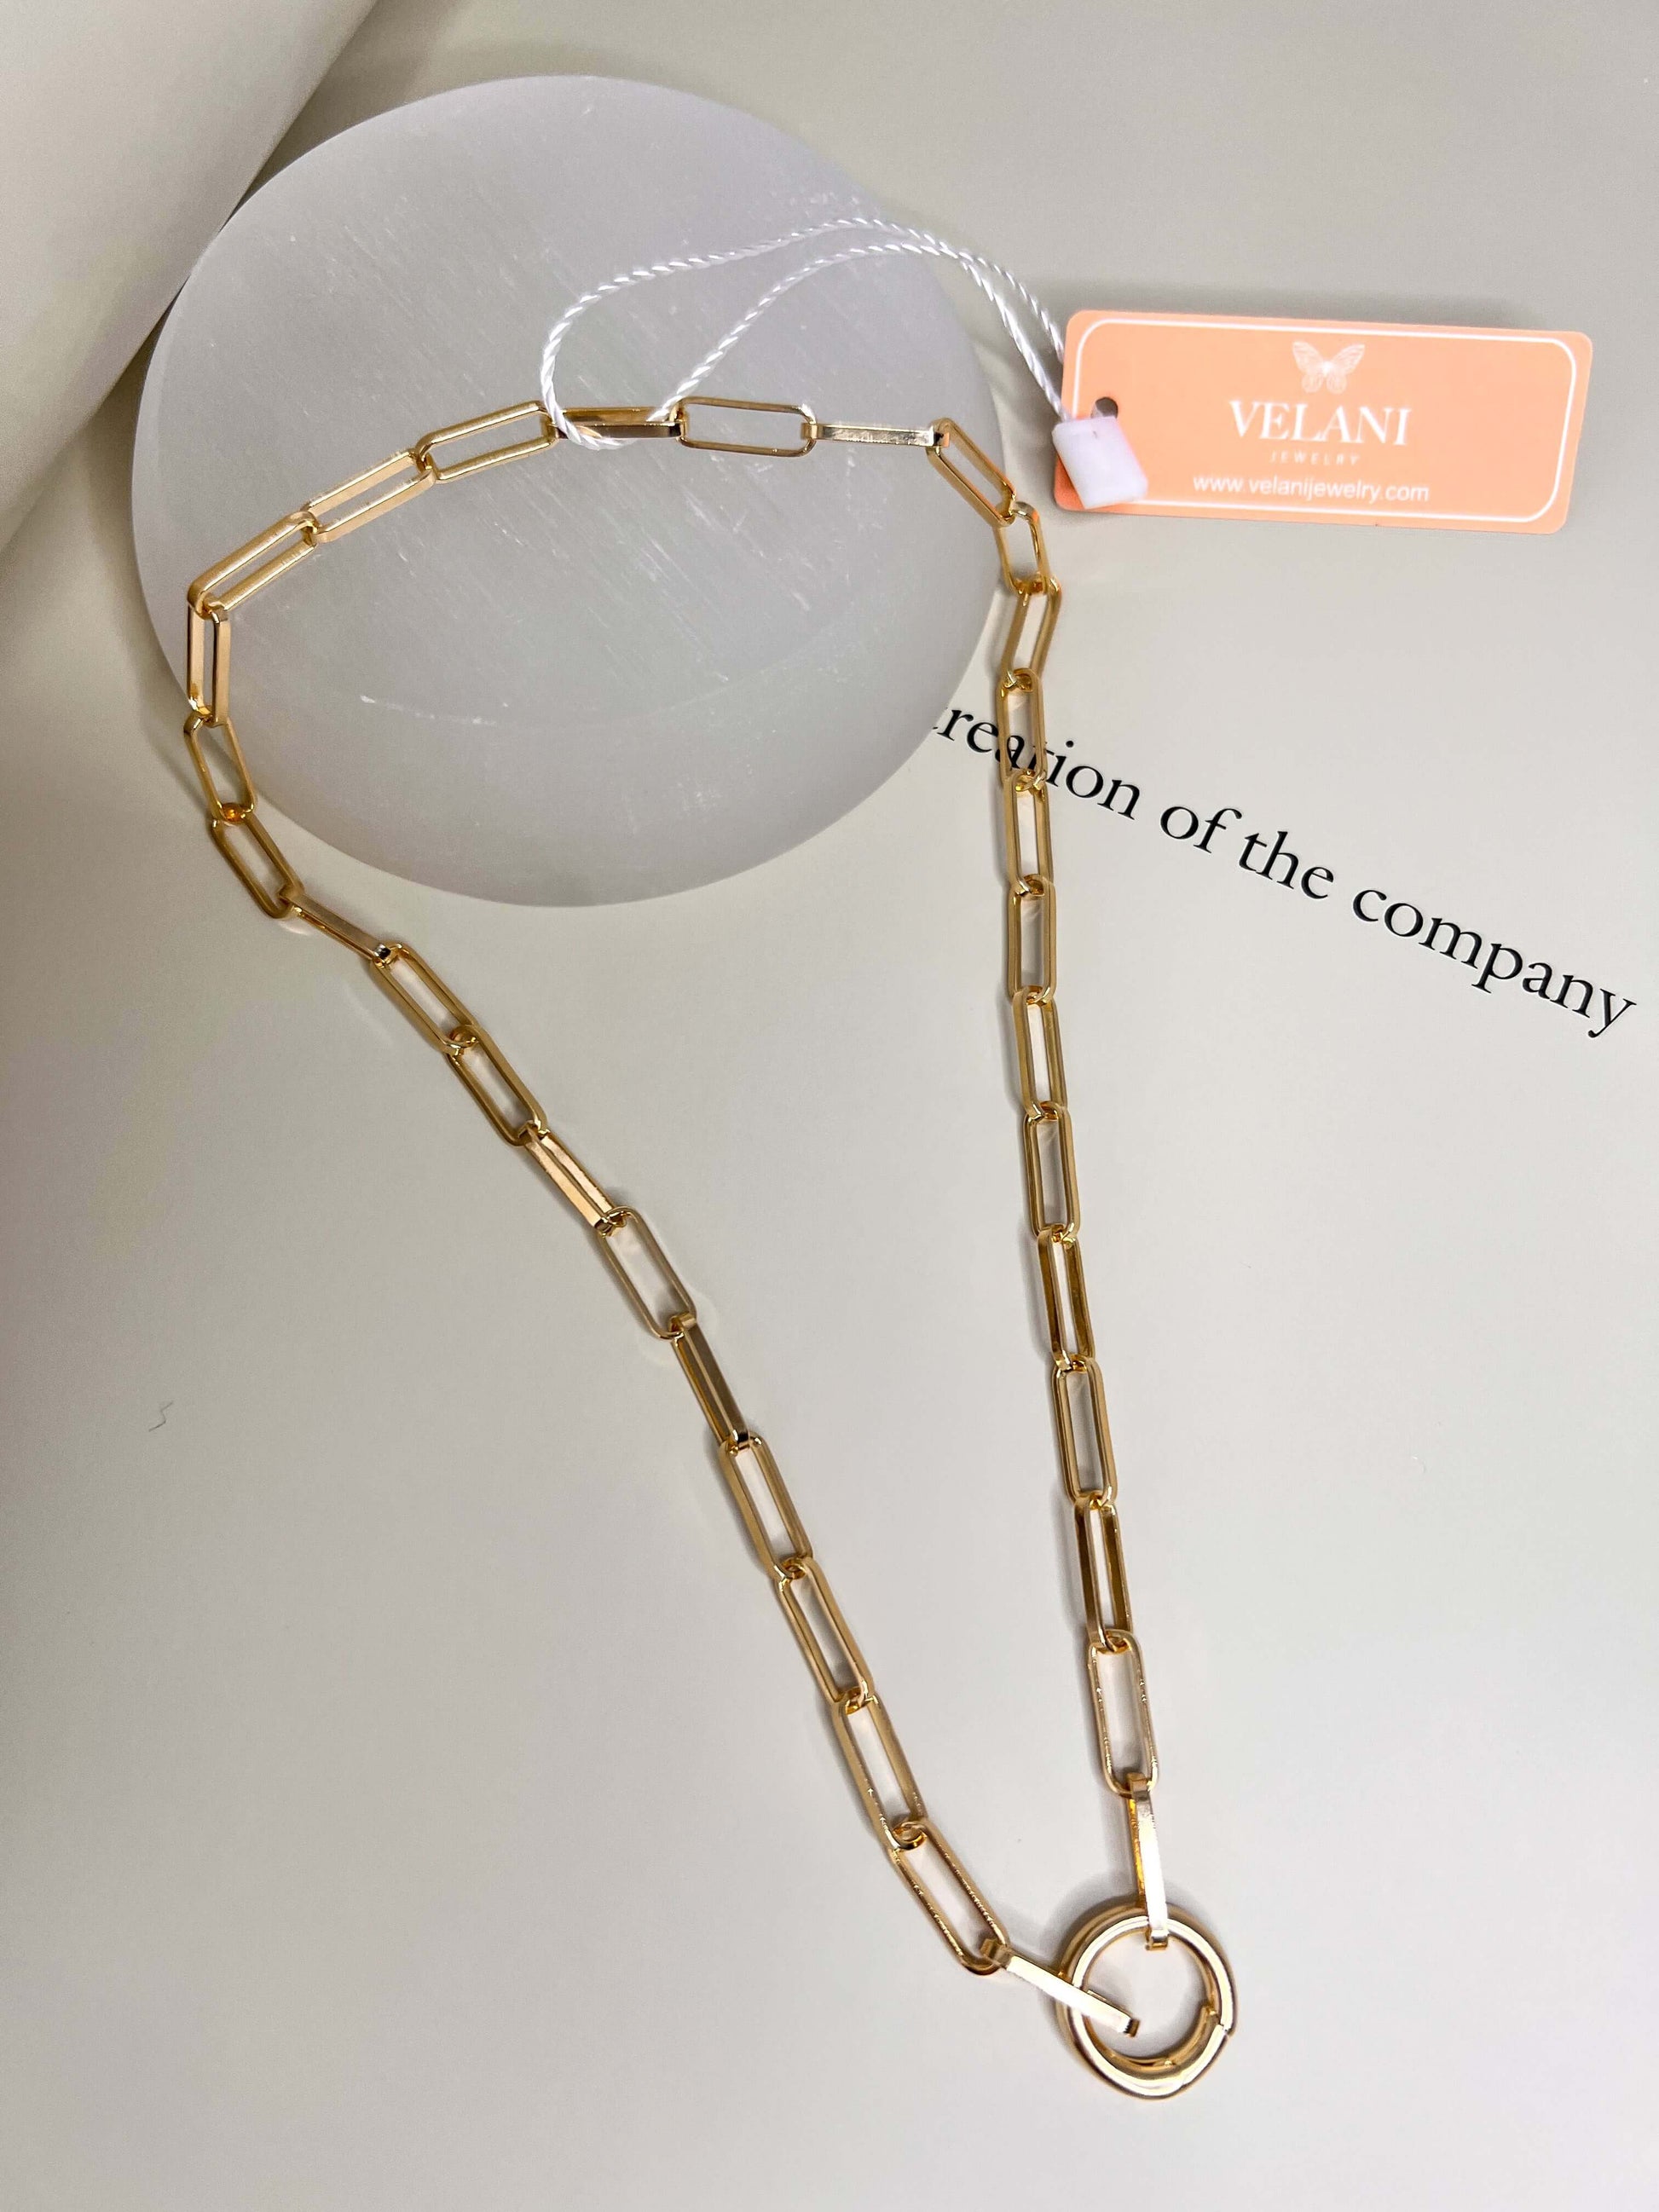 Velani Styled Paperclip Chain